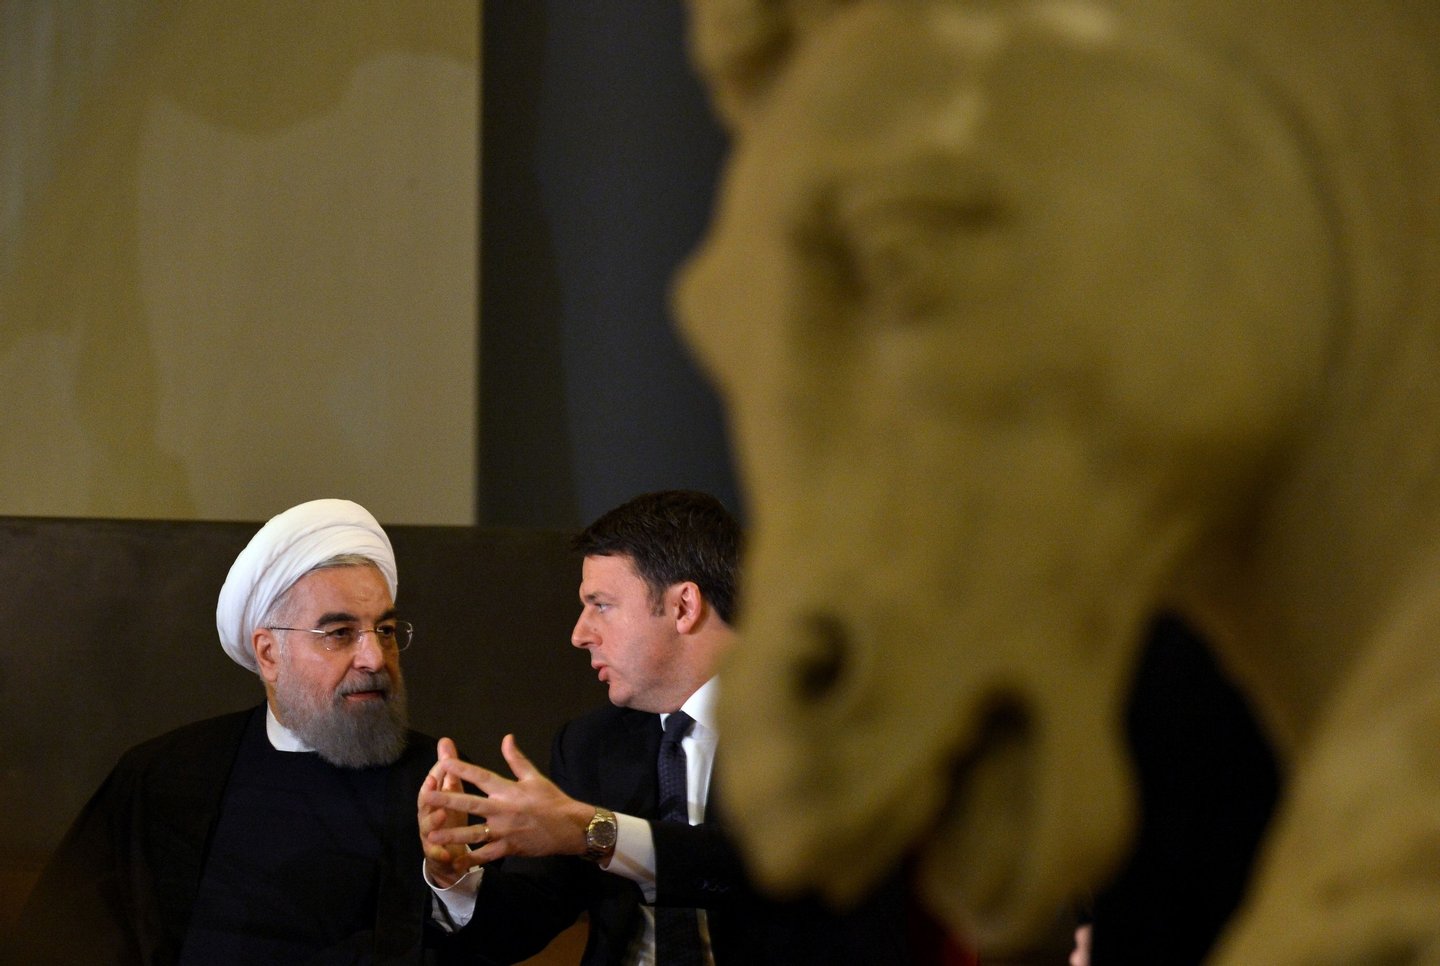 Italian Prime Minister Matteo Renzi (R) speaks with Iranian President Hassan Rouhani (L) during a meeting at the Capitol Hill in Rome on January 25, 2016. Iran's return to the international fold accelerated as Rouhani sealed multi-billion dollar deals with Italian companies keen to capitalise on the lifting of sanctions on the Islamic Republic. / AFP / TIZIANA FABI (Photo credit should read TIZIANA FABI/AFP/Getty Images)